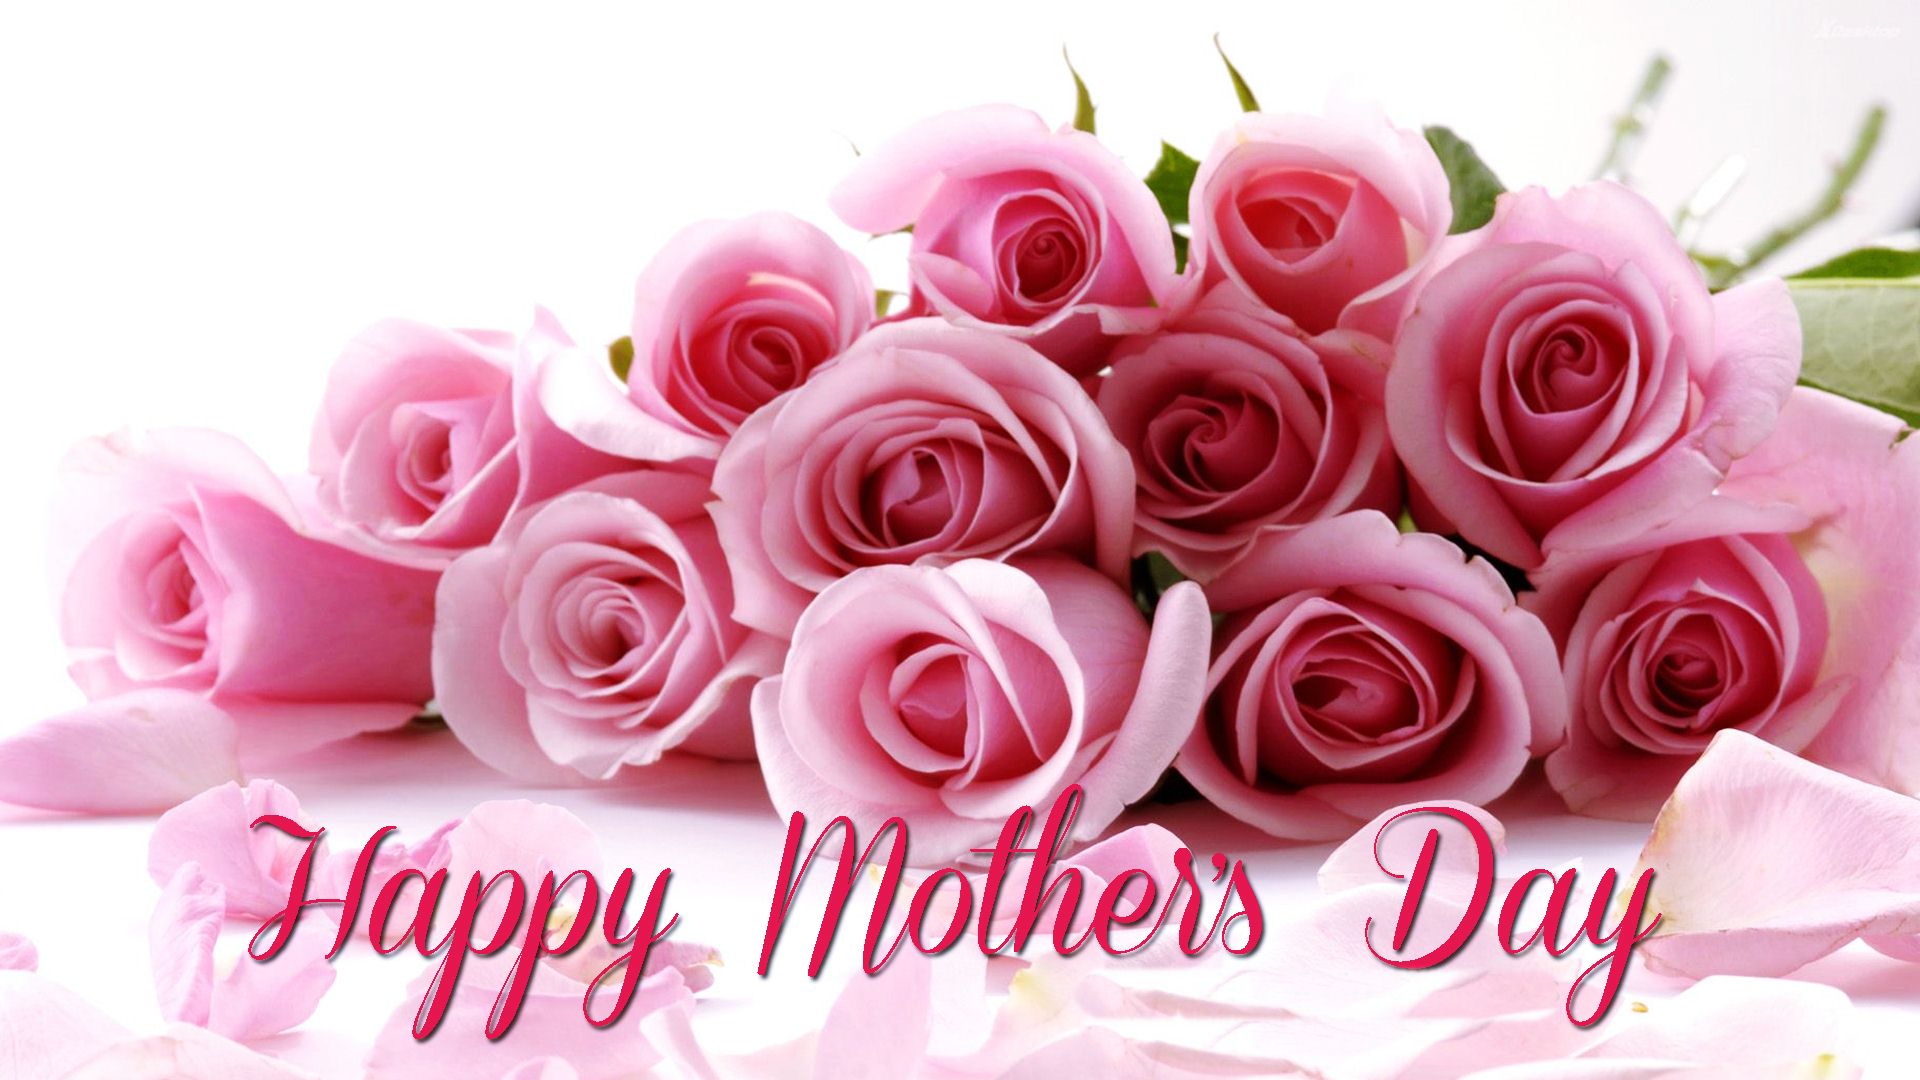 Mothers Day Images Free Download Wallpapers, Backgrounds, Images